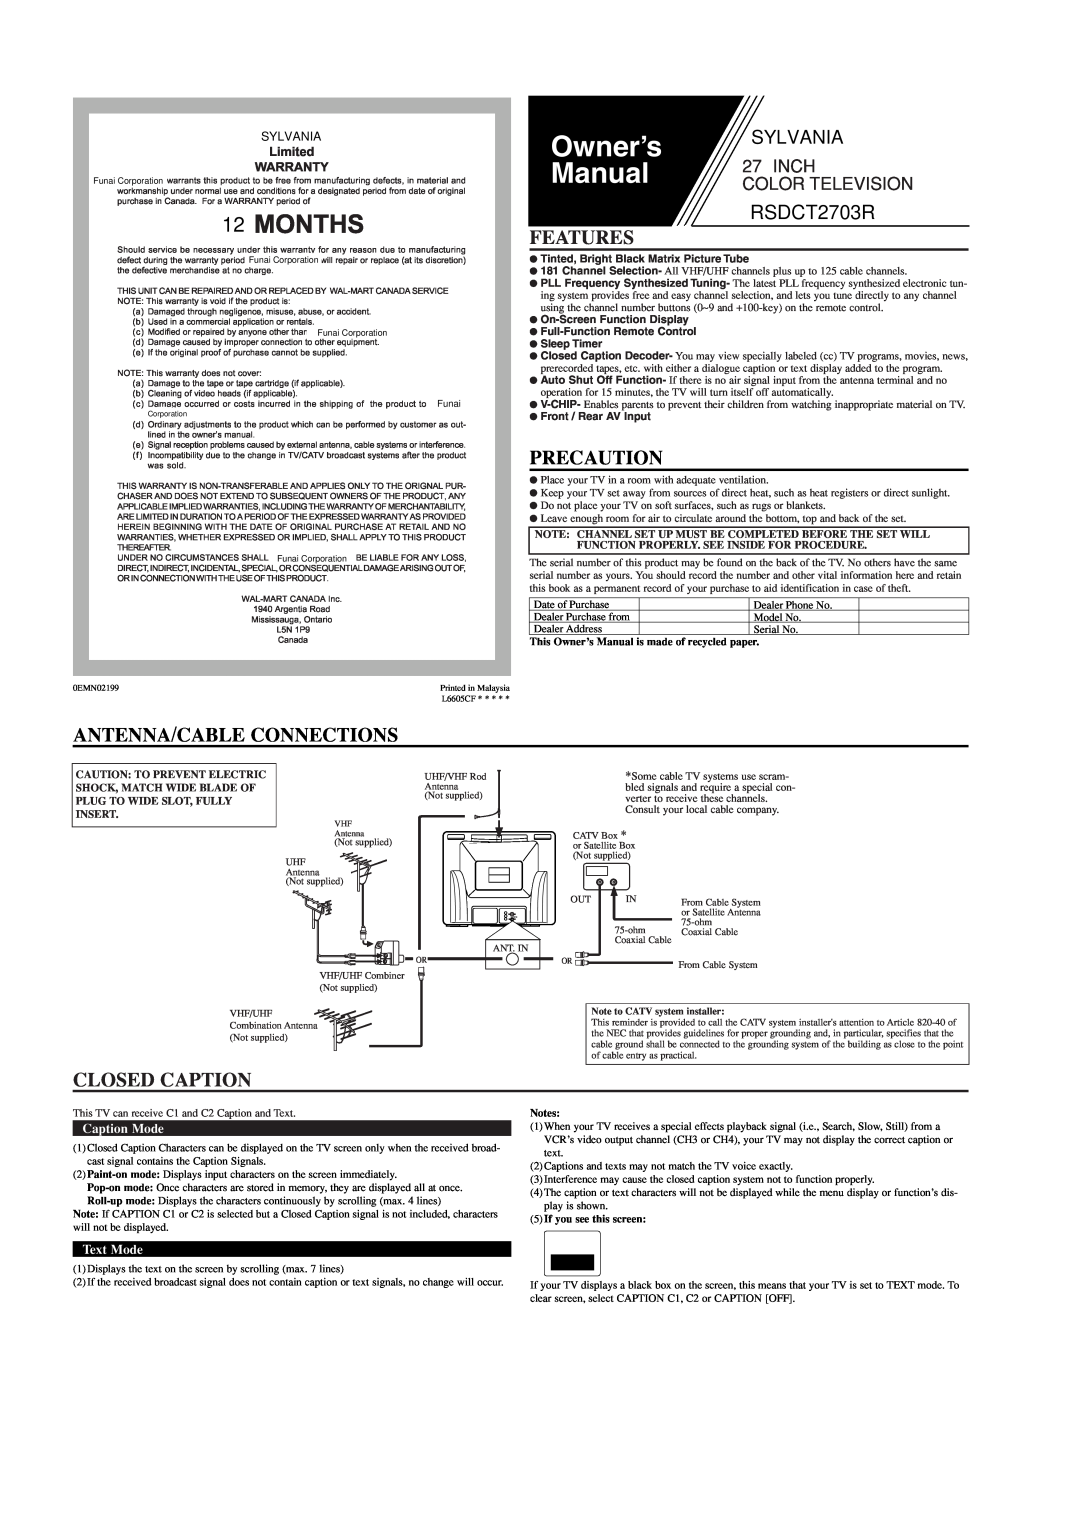 Sylvania RSDCT2703R owner manual Features, Precaution, Antenna/Cable Connections, Closed Caption, Caption Mode, Text Mode 